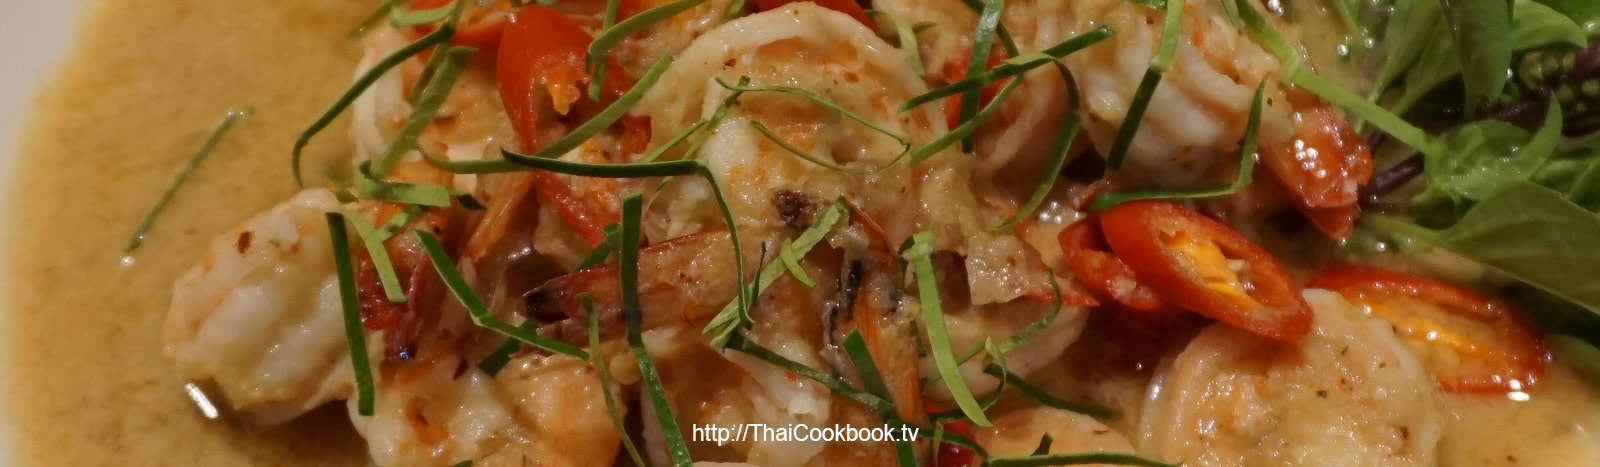 Authentic Thai recipe for Shrimp in Coconut and Red Curry Sauce